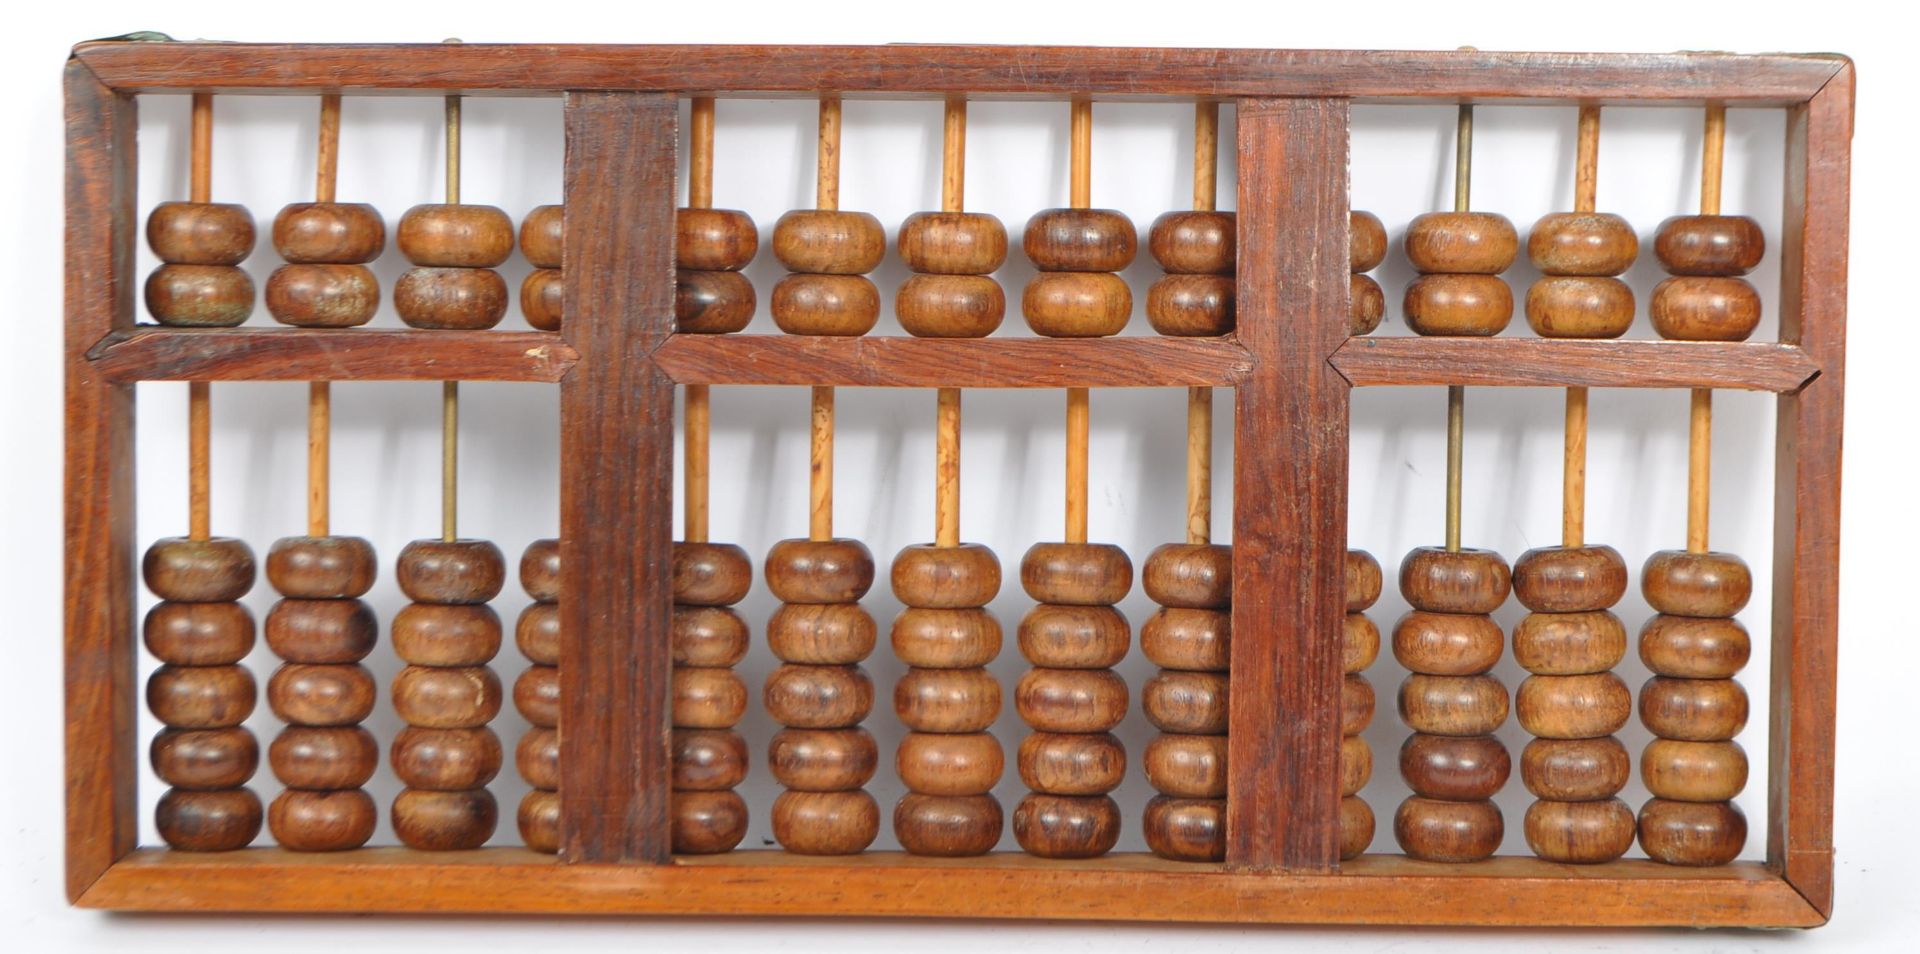 EARLY 20TH CENTURY CHINESE WOODEN & BRASS ABACUS - Image 4 of 4